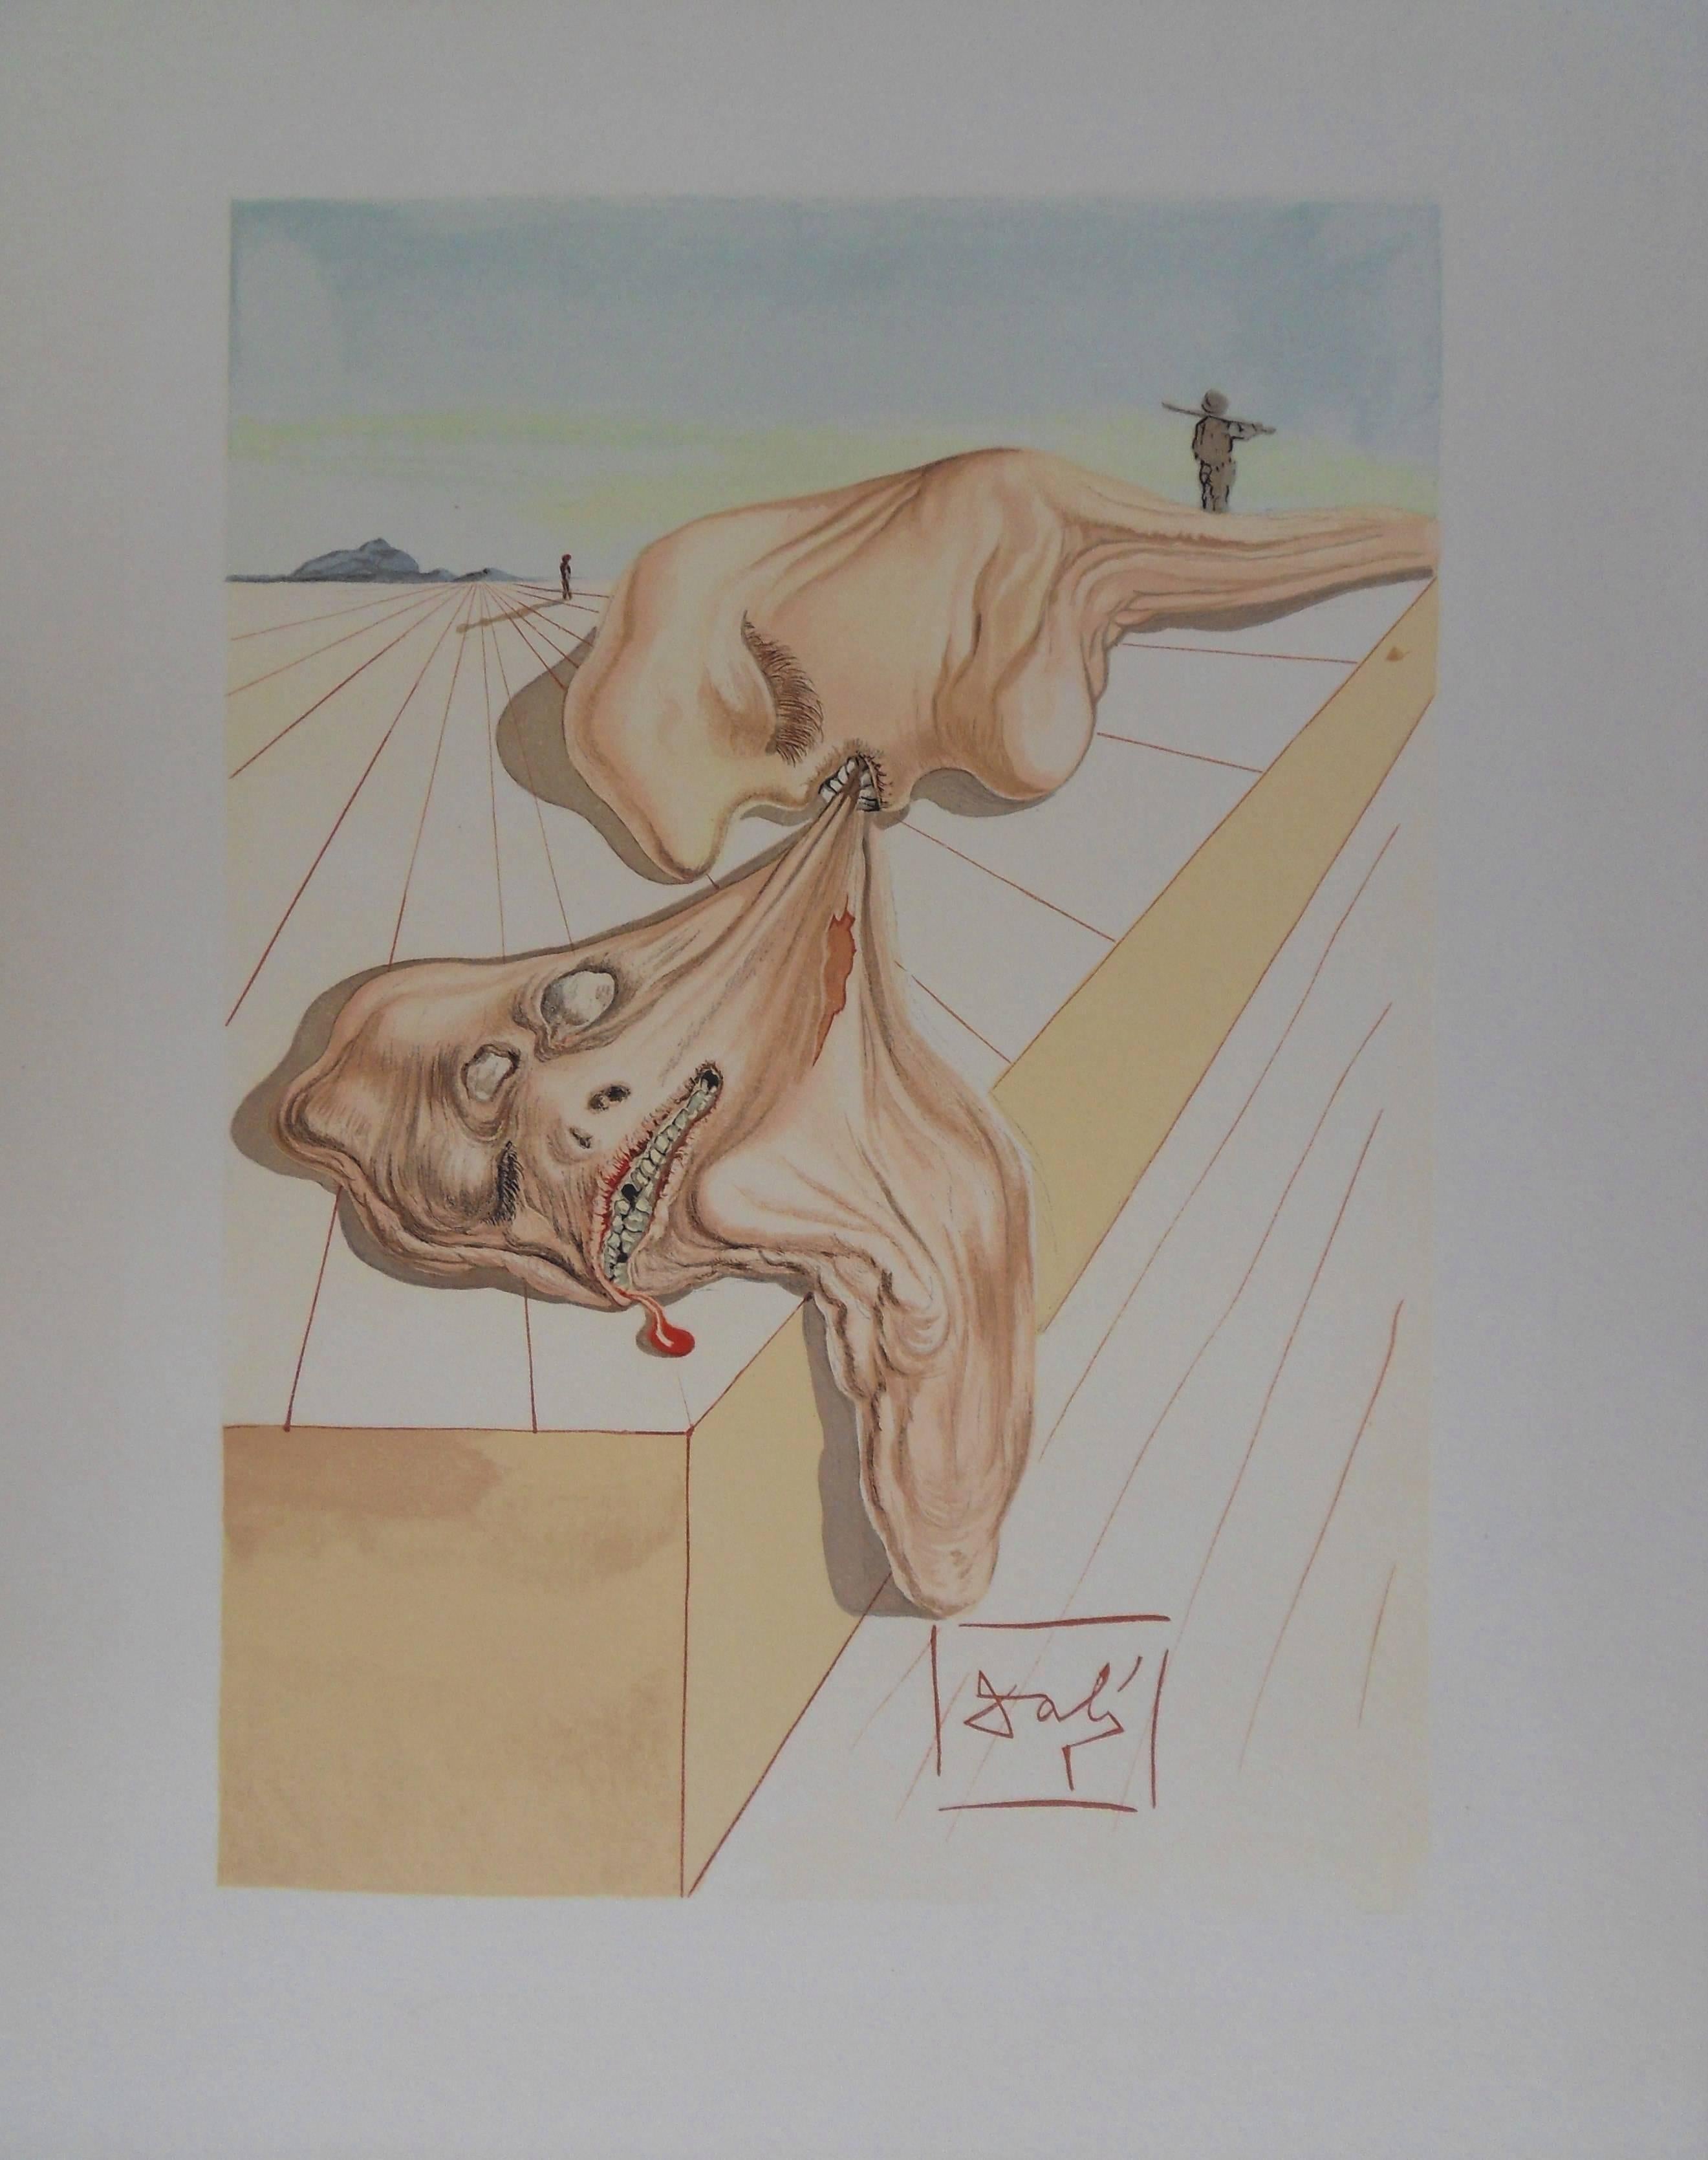 Salvador Dalí Figurative Print - Hell 30 - The Men Who Eat Each Other - Color woodcut - 1963